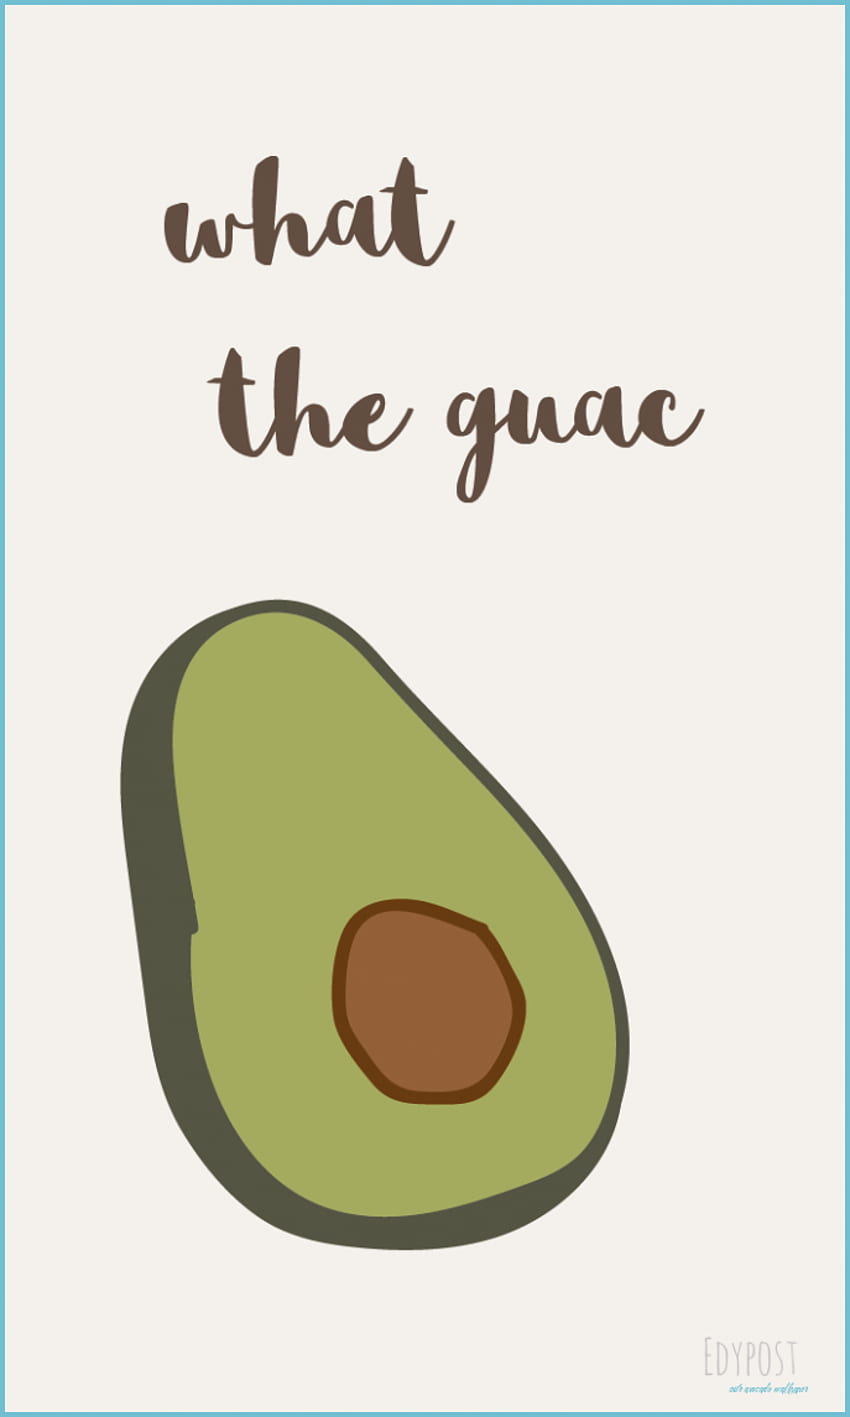 Startio  Insights and stats on Cute Avocado Wallpapers